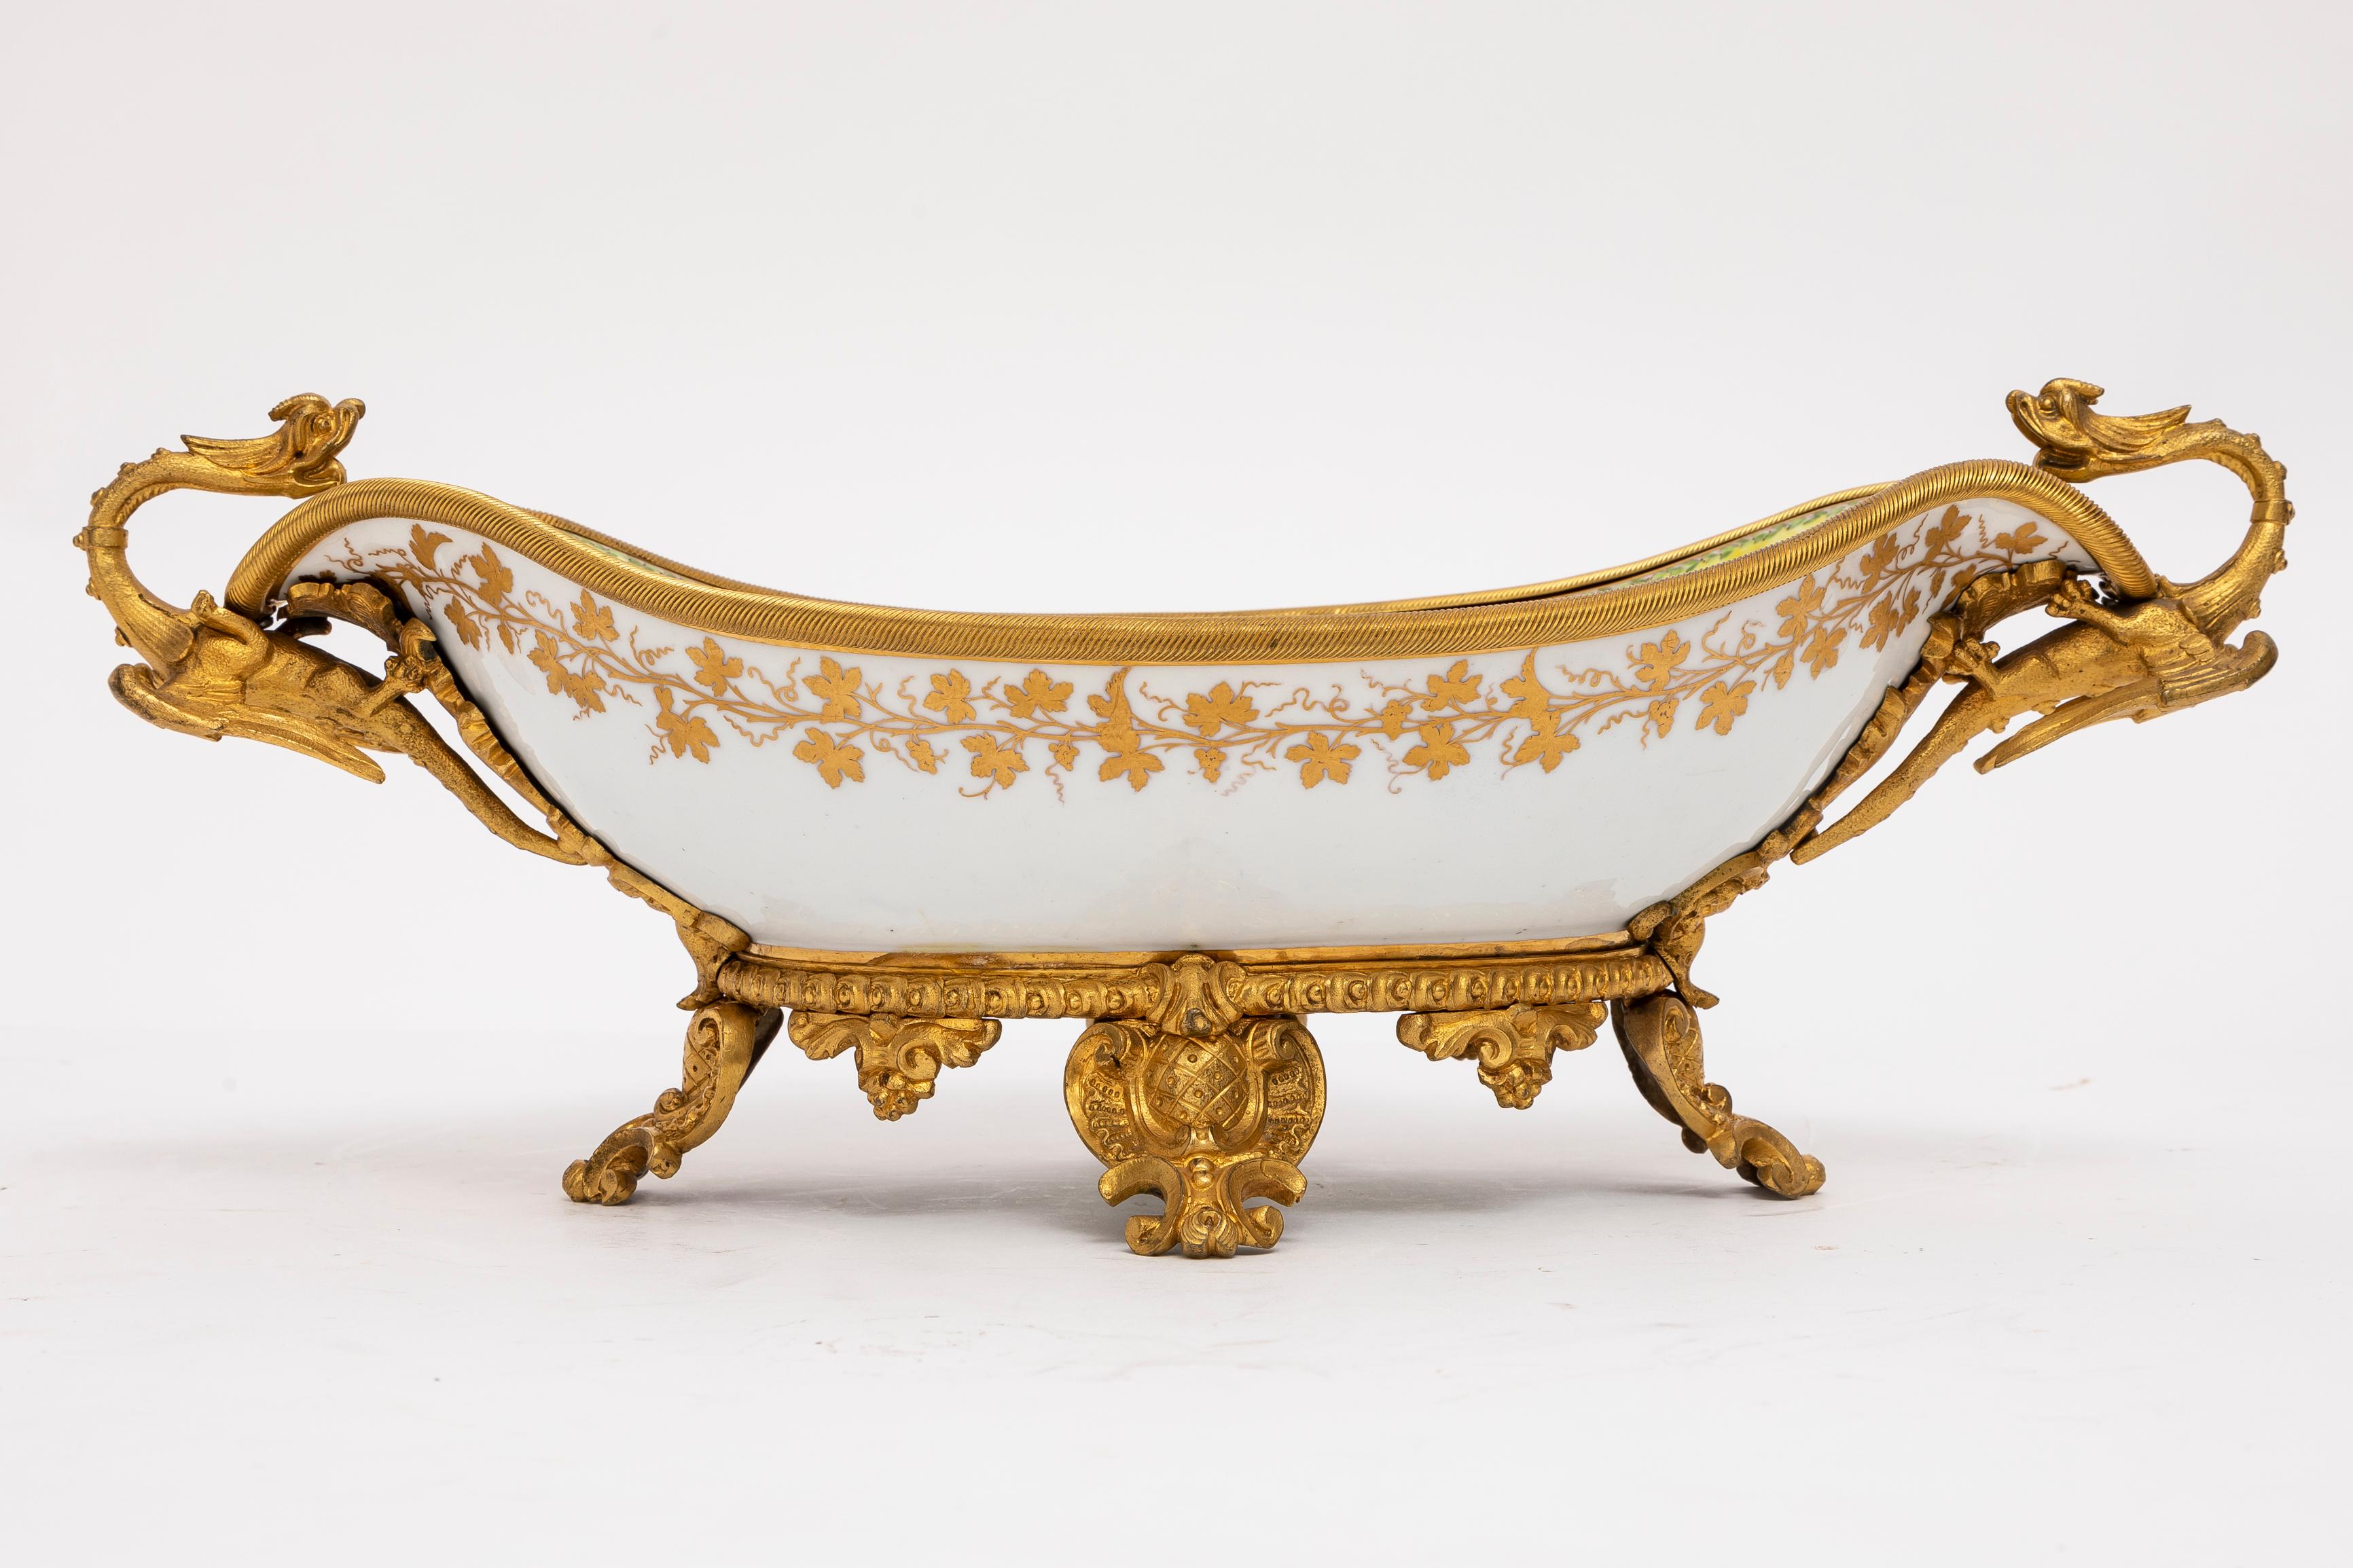 An 18th C. French Ormolu Mounted Sevres Porcelain Centerpiece w/ Dragon Handles In Good Condition For Sale In New York, NY